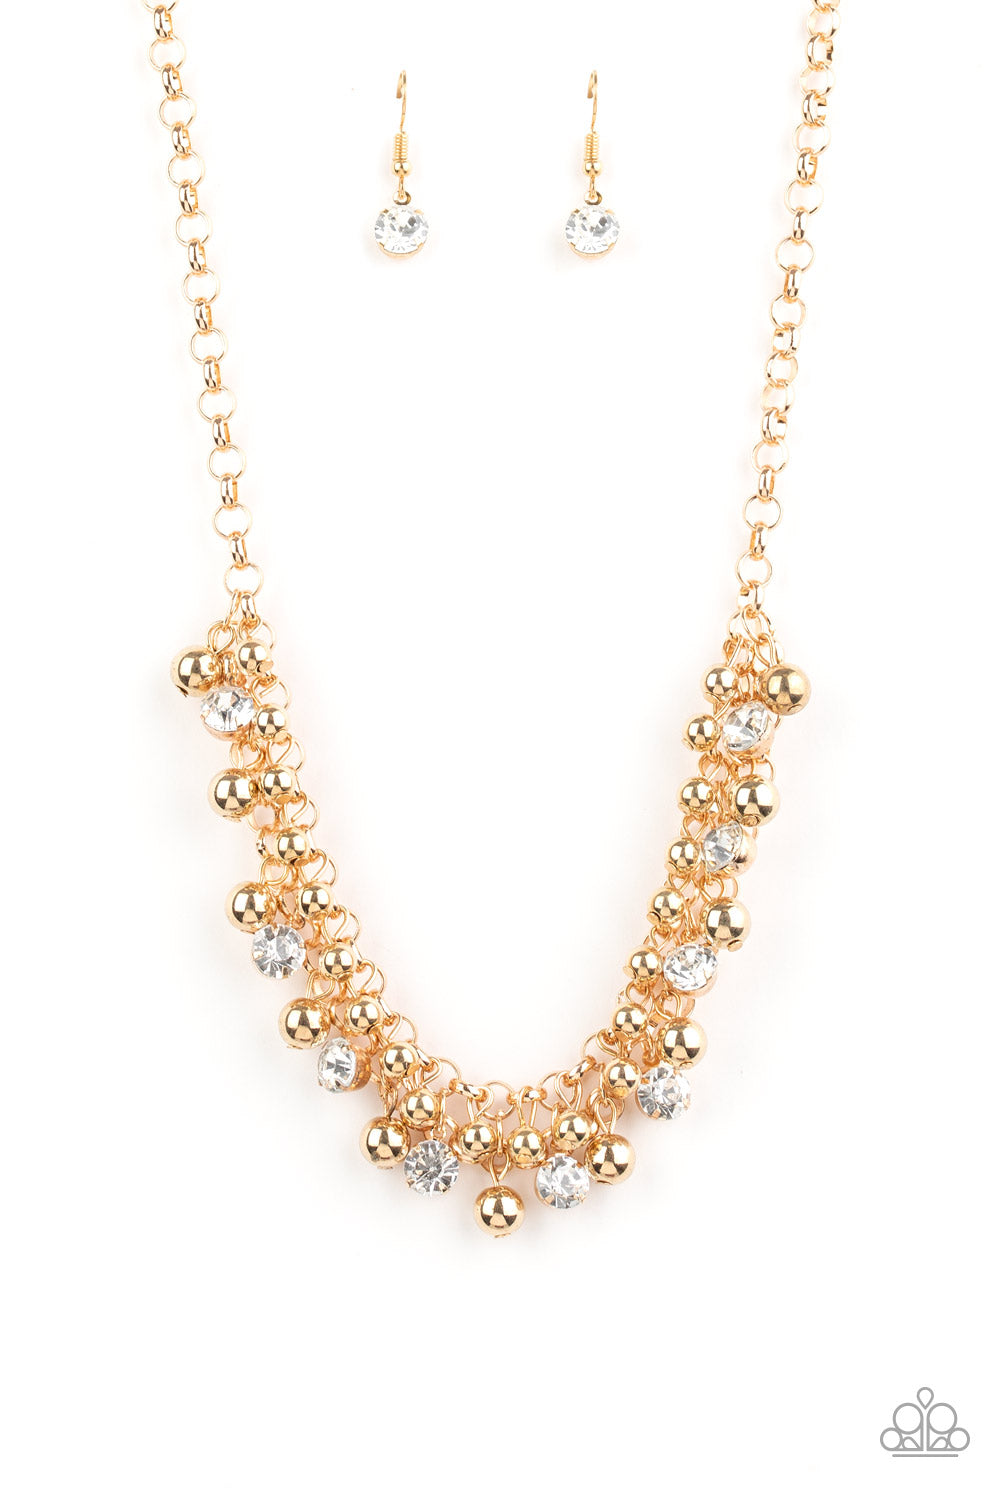 Paparazzi Accessories - Wall Street Winner - Gold Necklace